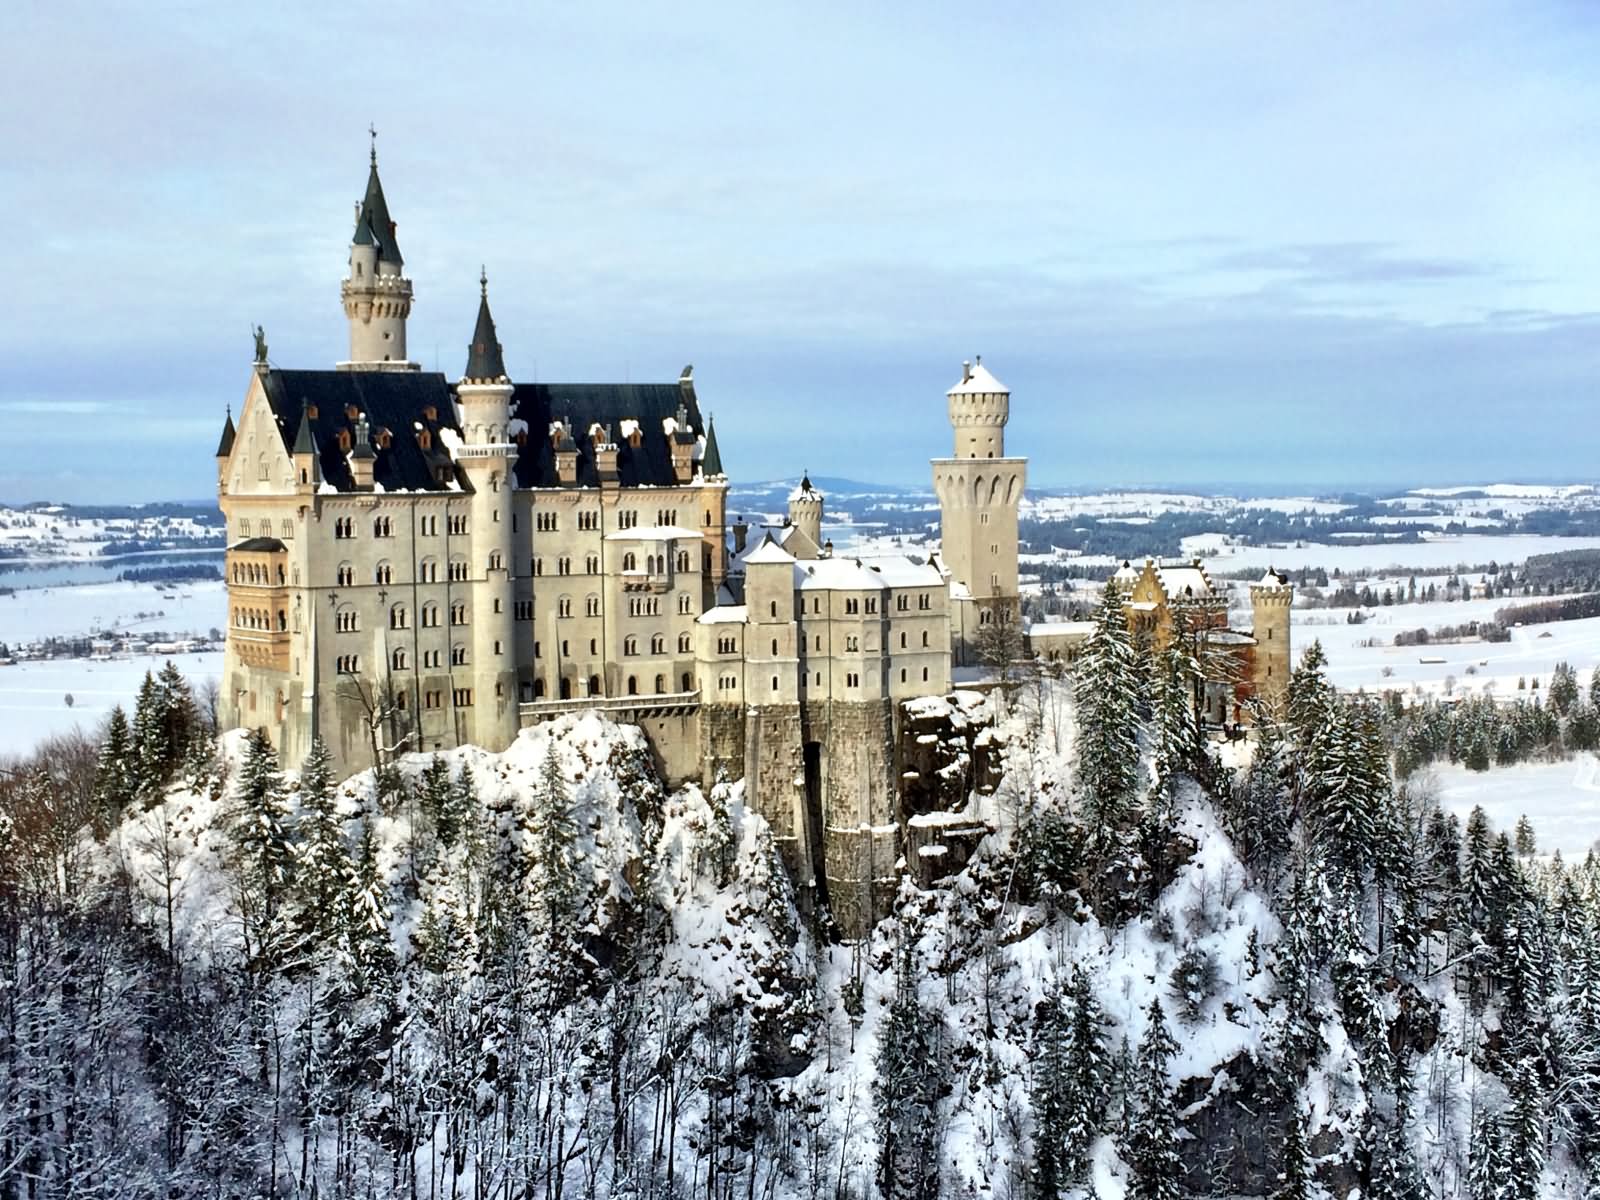 Side View Image Of The Neuschwanstein Castle In Winters